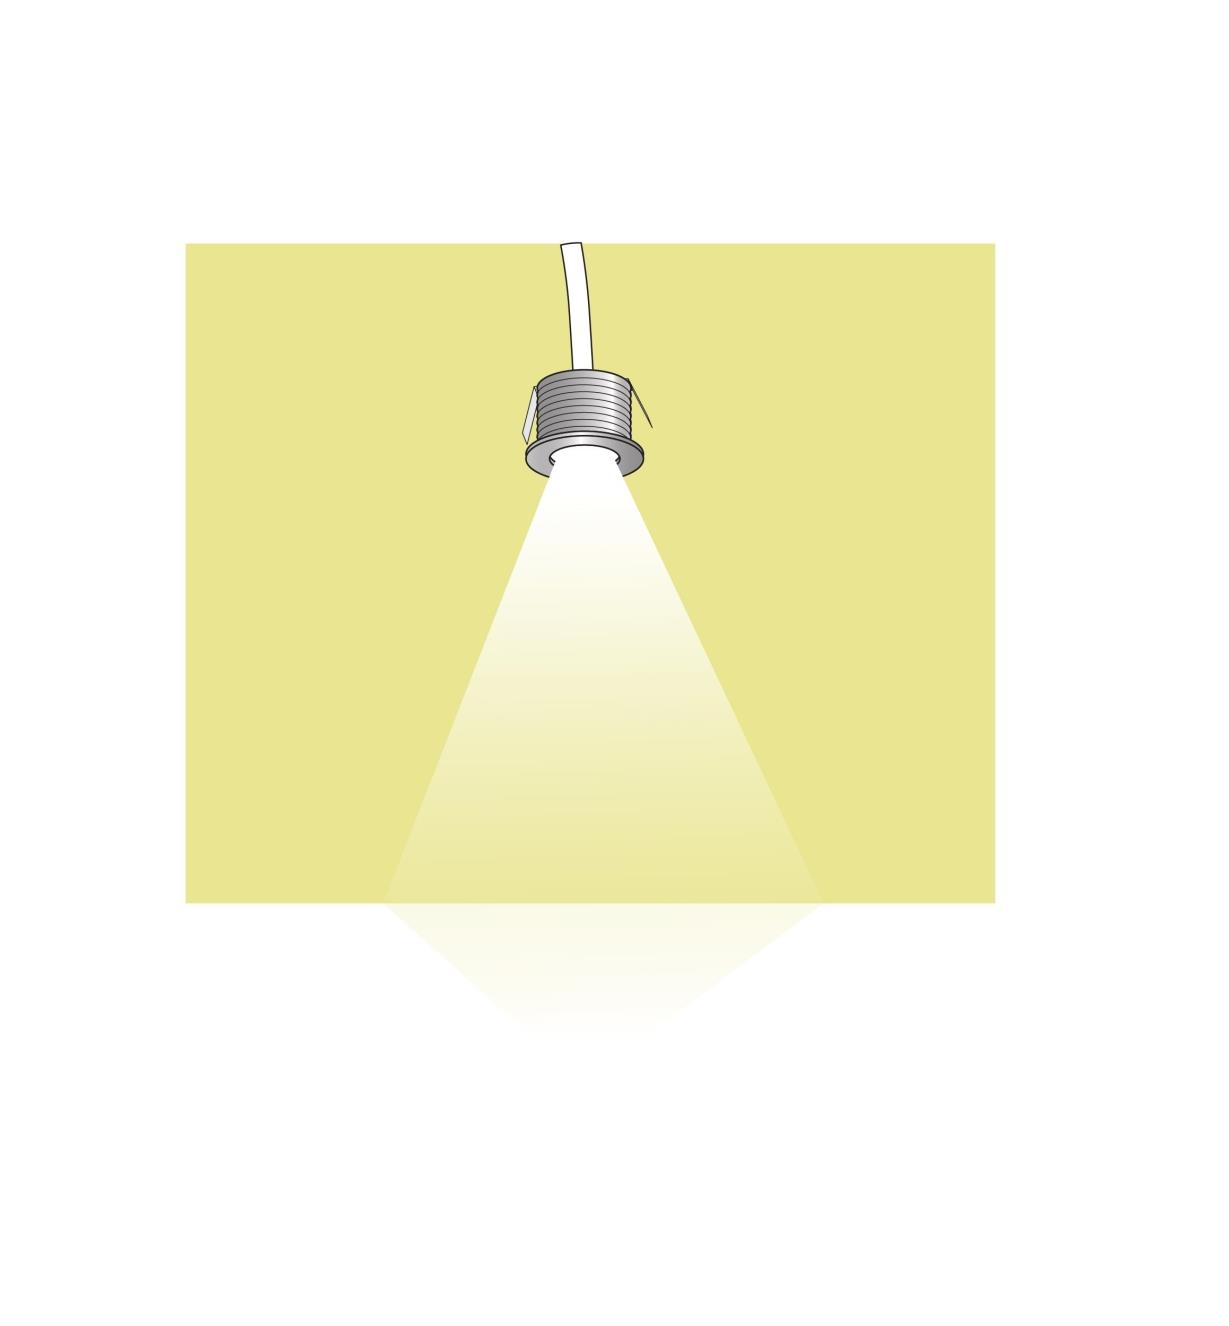 Illustration of Mini Recessed LED Light being installed